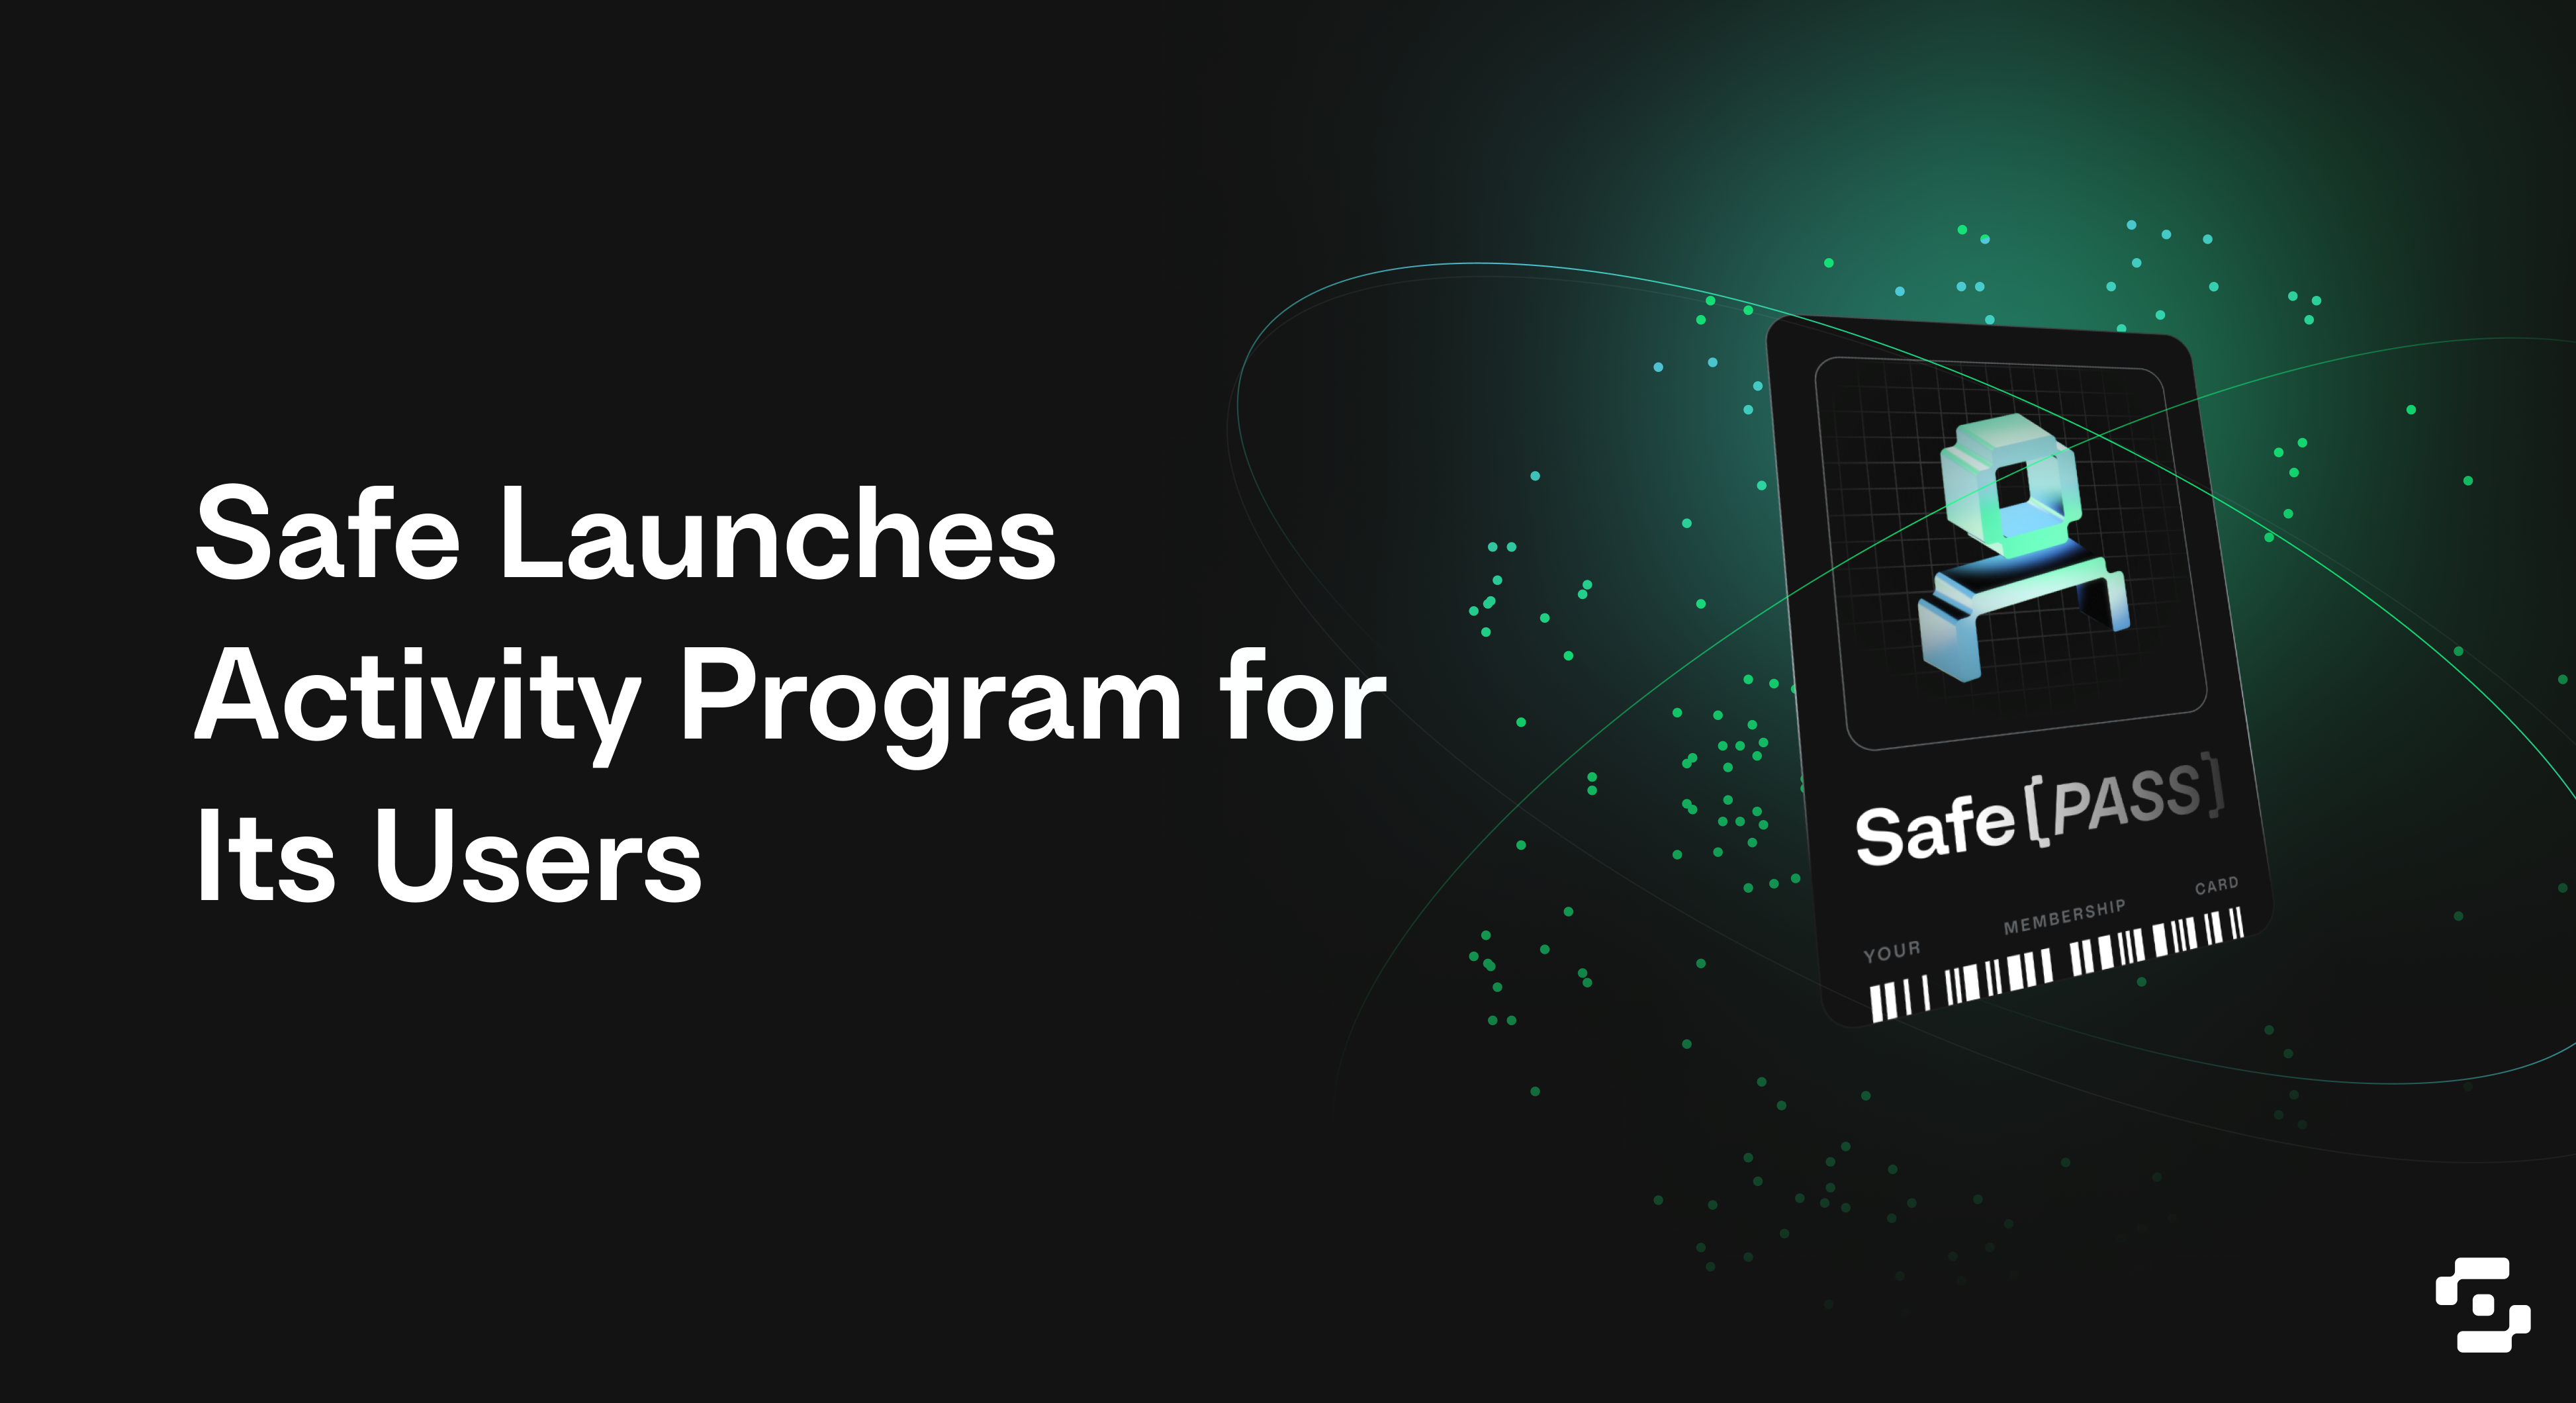 Safe Launches Activity Program for Its Users